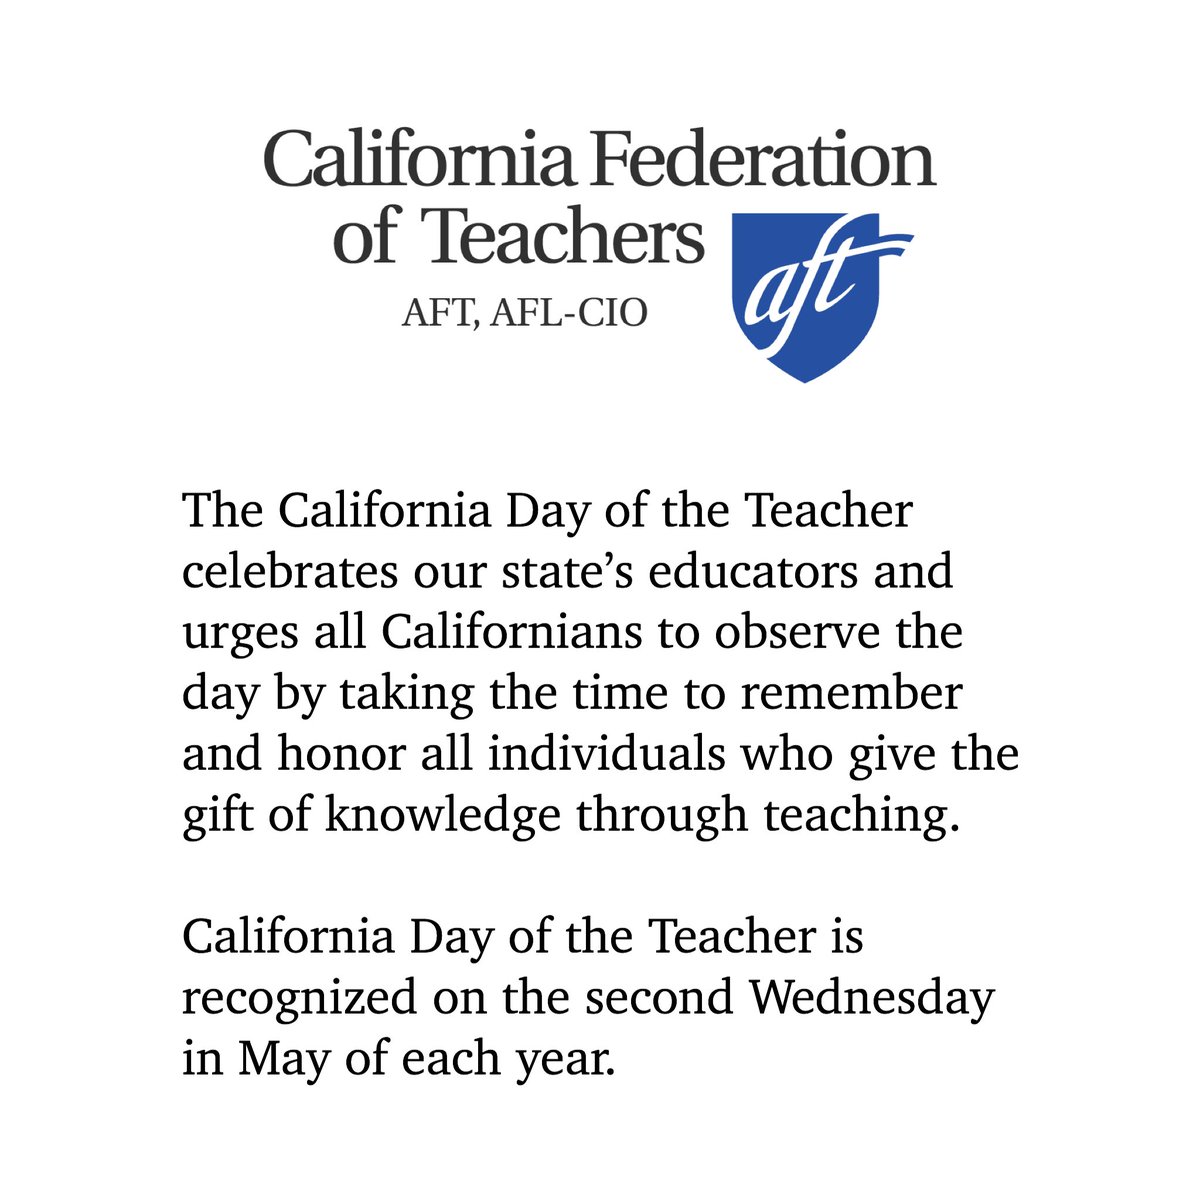 Saluting all the California educators today on the California Day of the Teacher!
#californiadayoftheteacher